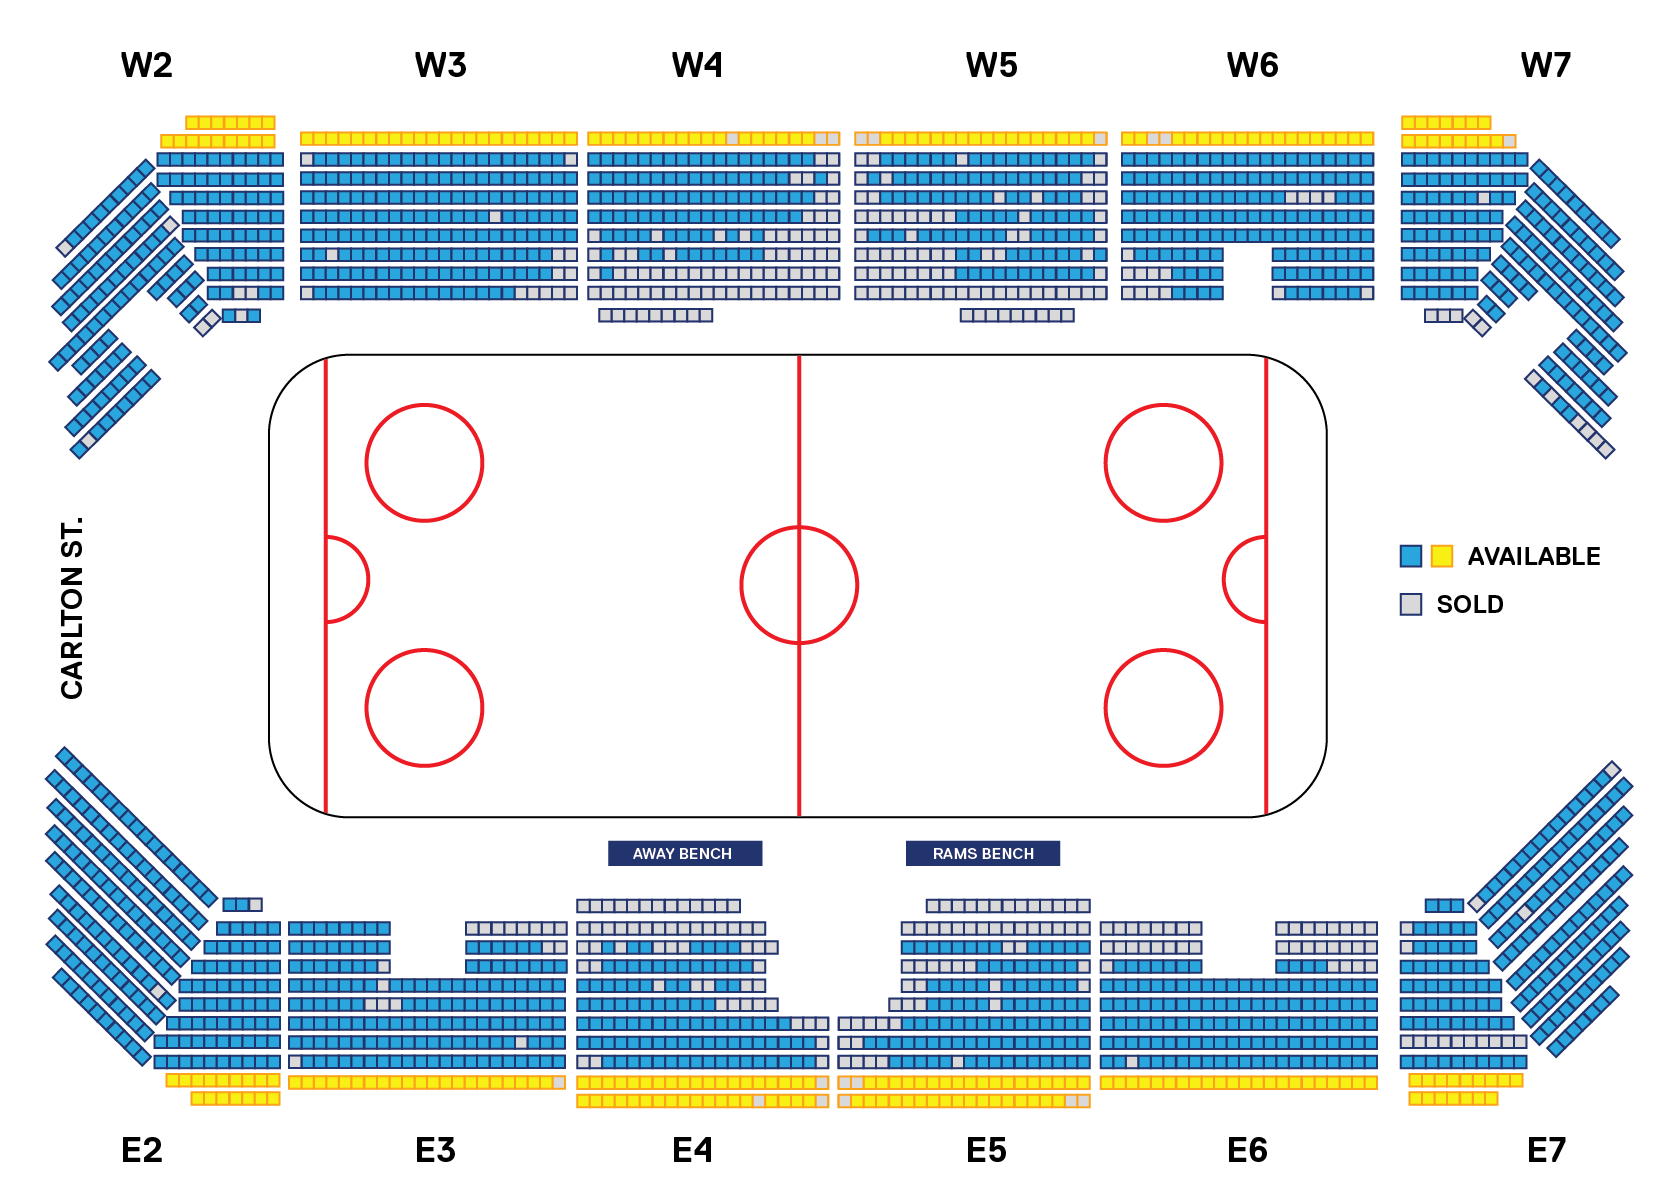 Mattamy Athletic Centre Seating Chart